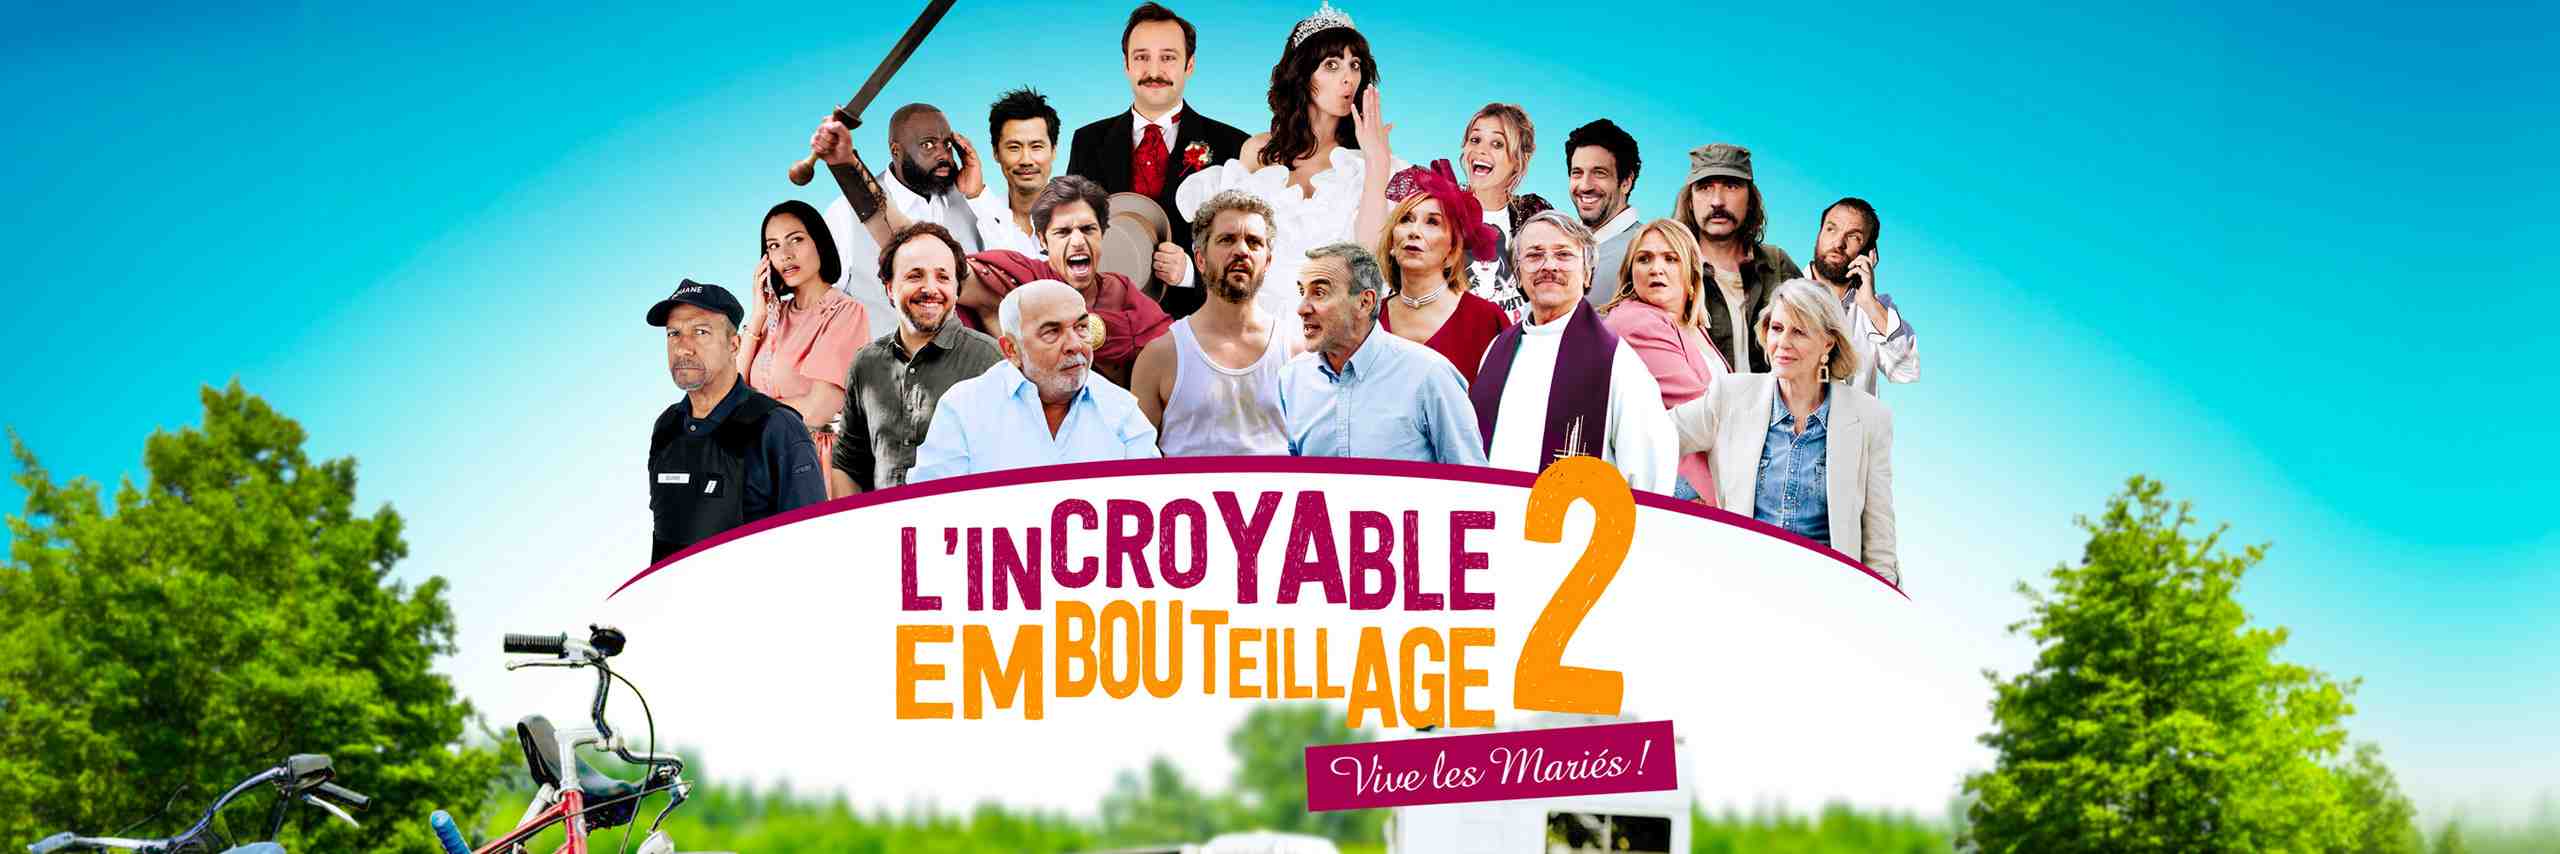 L'incroyable embouteillage replay streaming